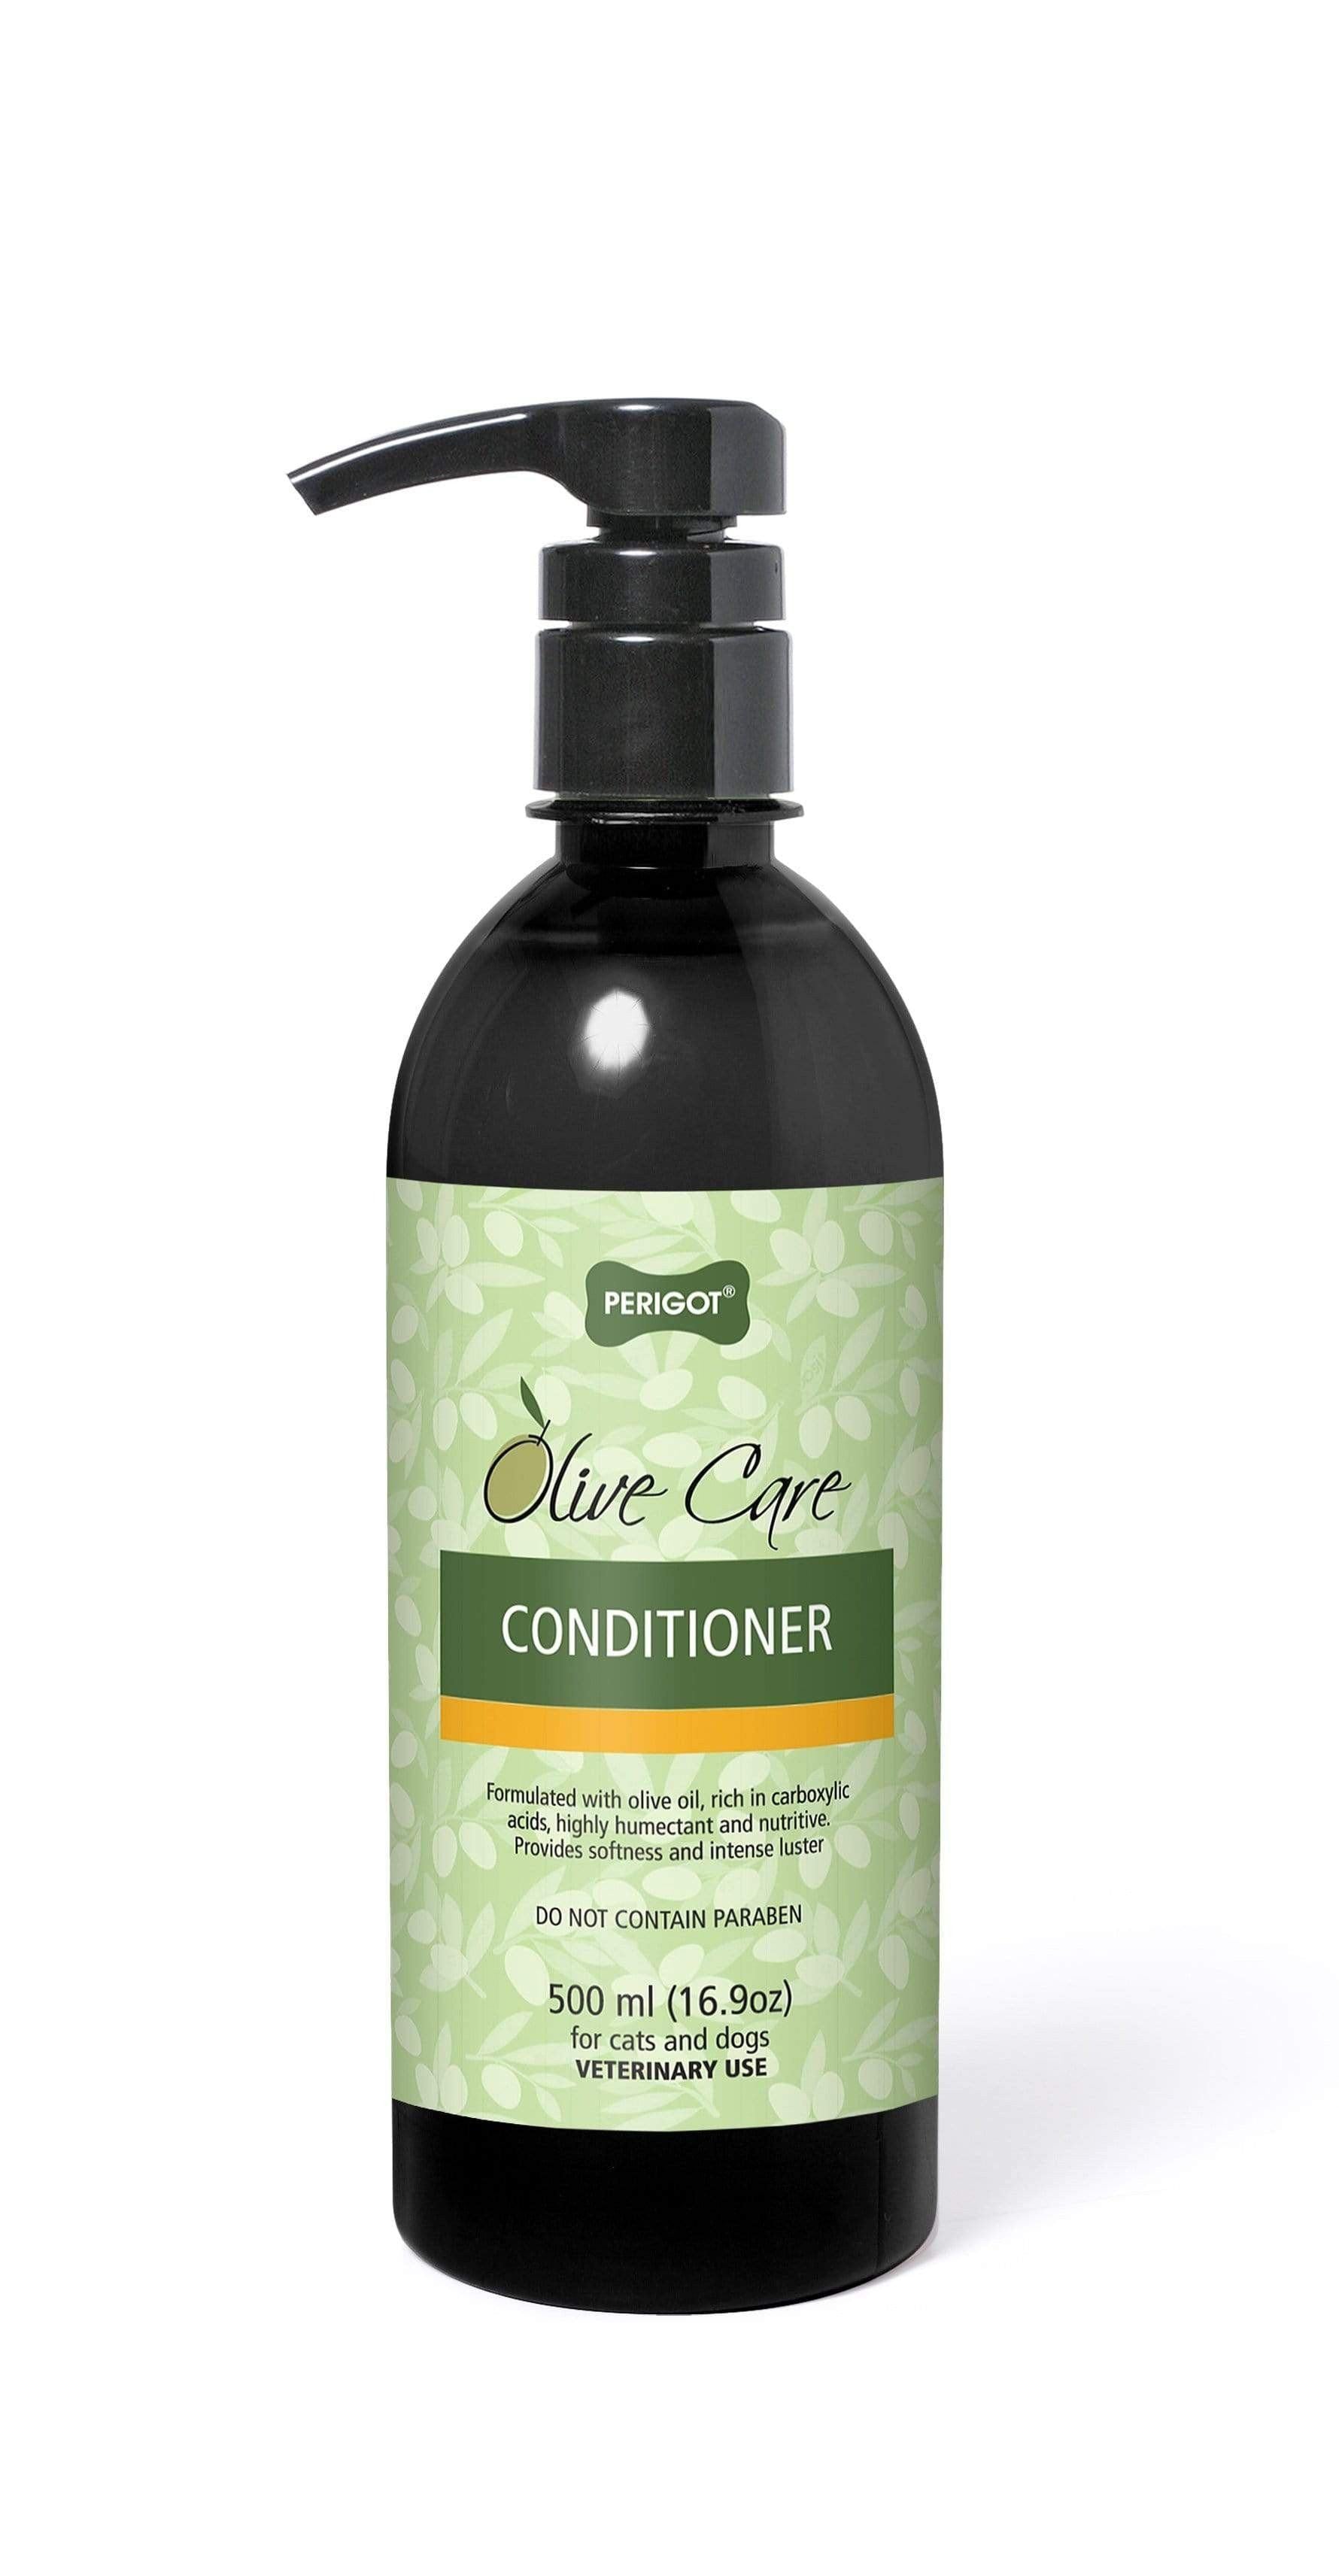 Perigot - Olive Care Conditioner for Dogs | Promotes softness and intense shine | Cats & Dogs